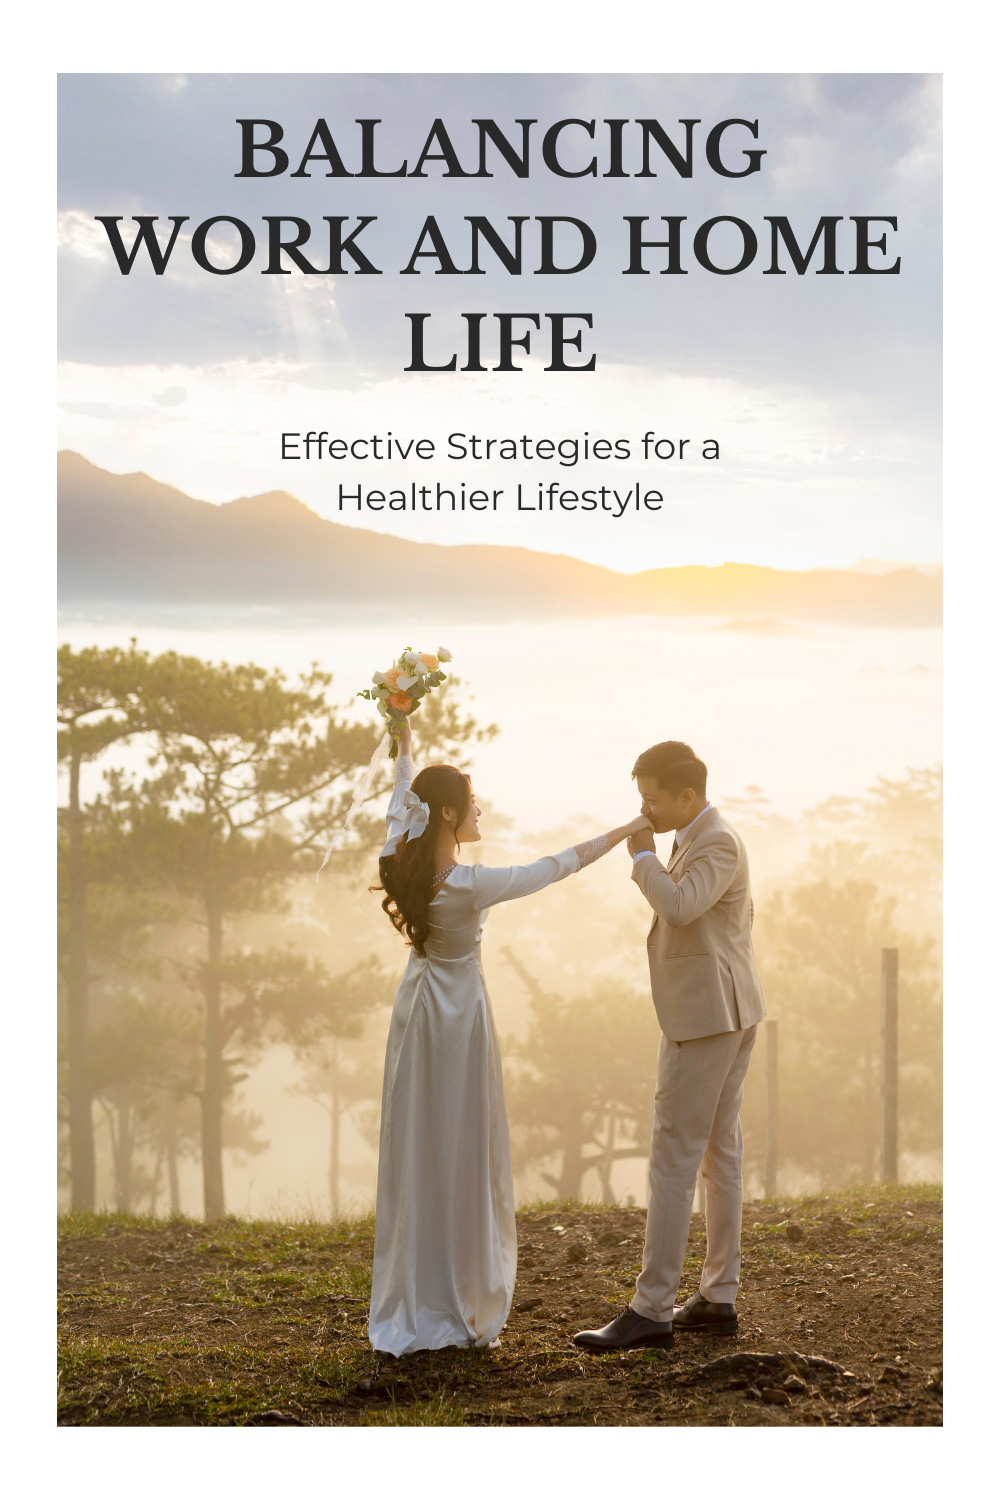 Balancing Work and Home Life: Effective Strategies for a Healthier Lifestyle